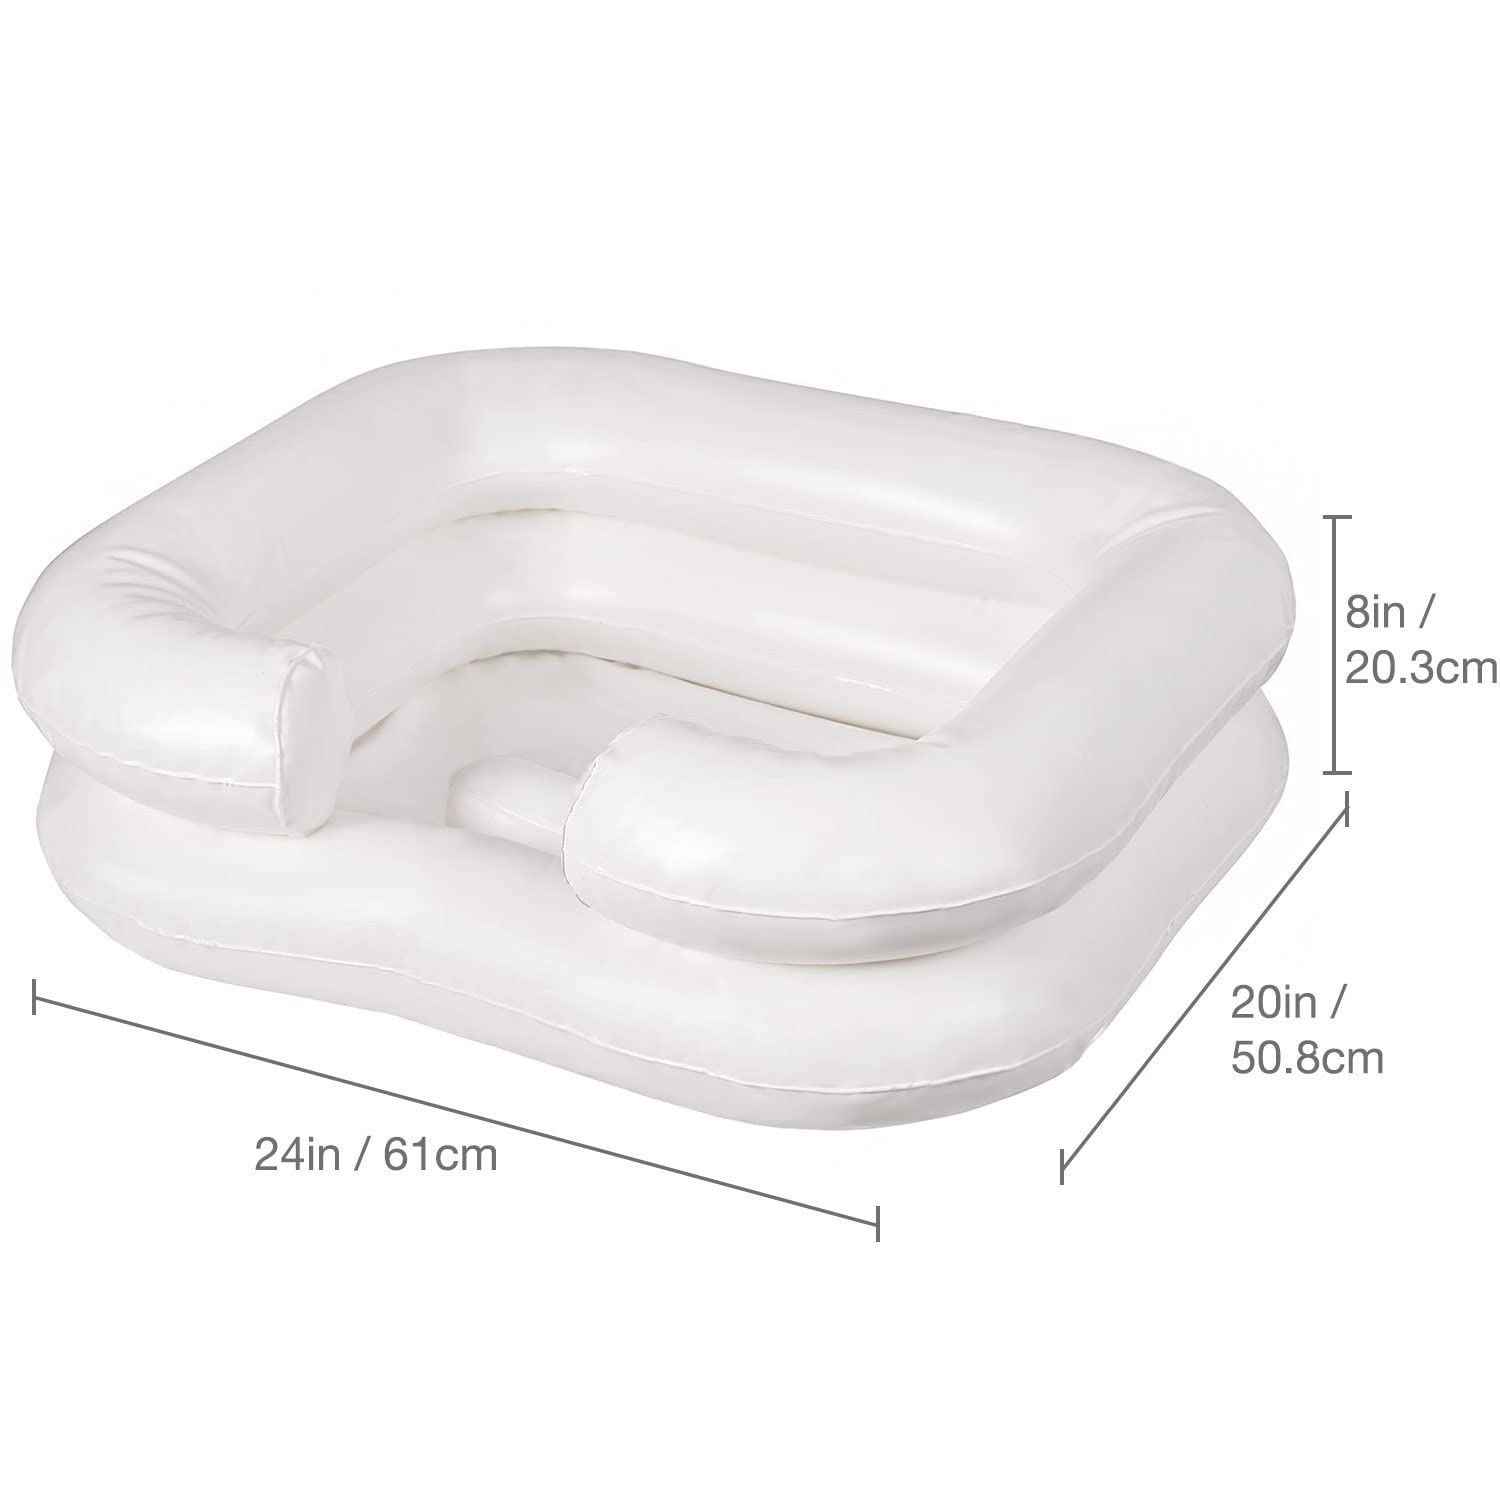 DMI Portable Inflatable Shampoo Bowl for Bedside and in Bed Hair Washing, Hair Cuts and Hair Coloring for The Elderly, Disabled, Bedridden and Handicapped, White (Pack of 2)